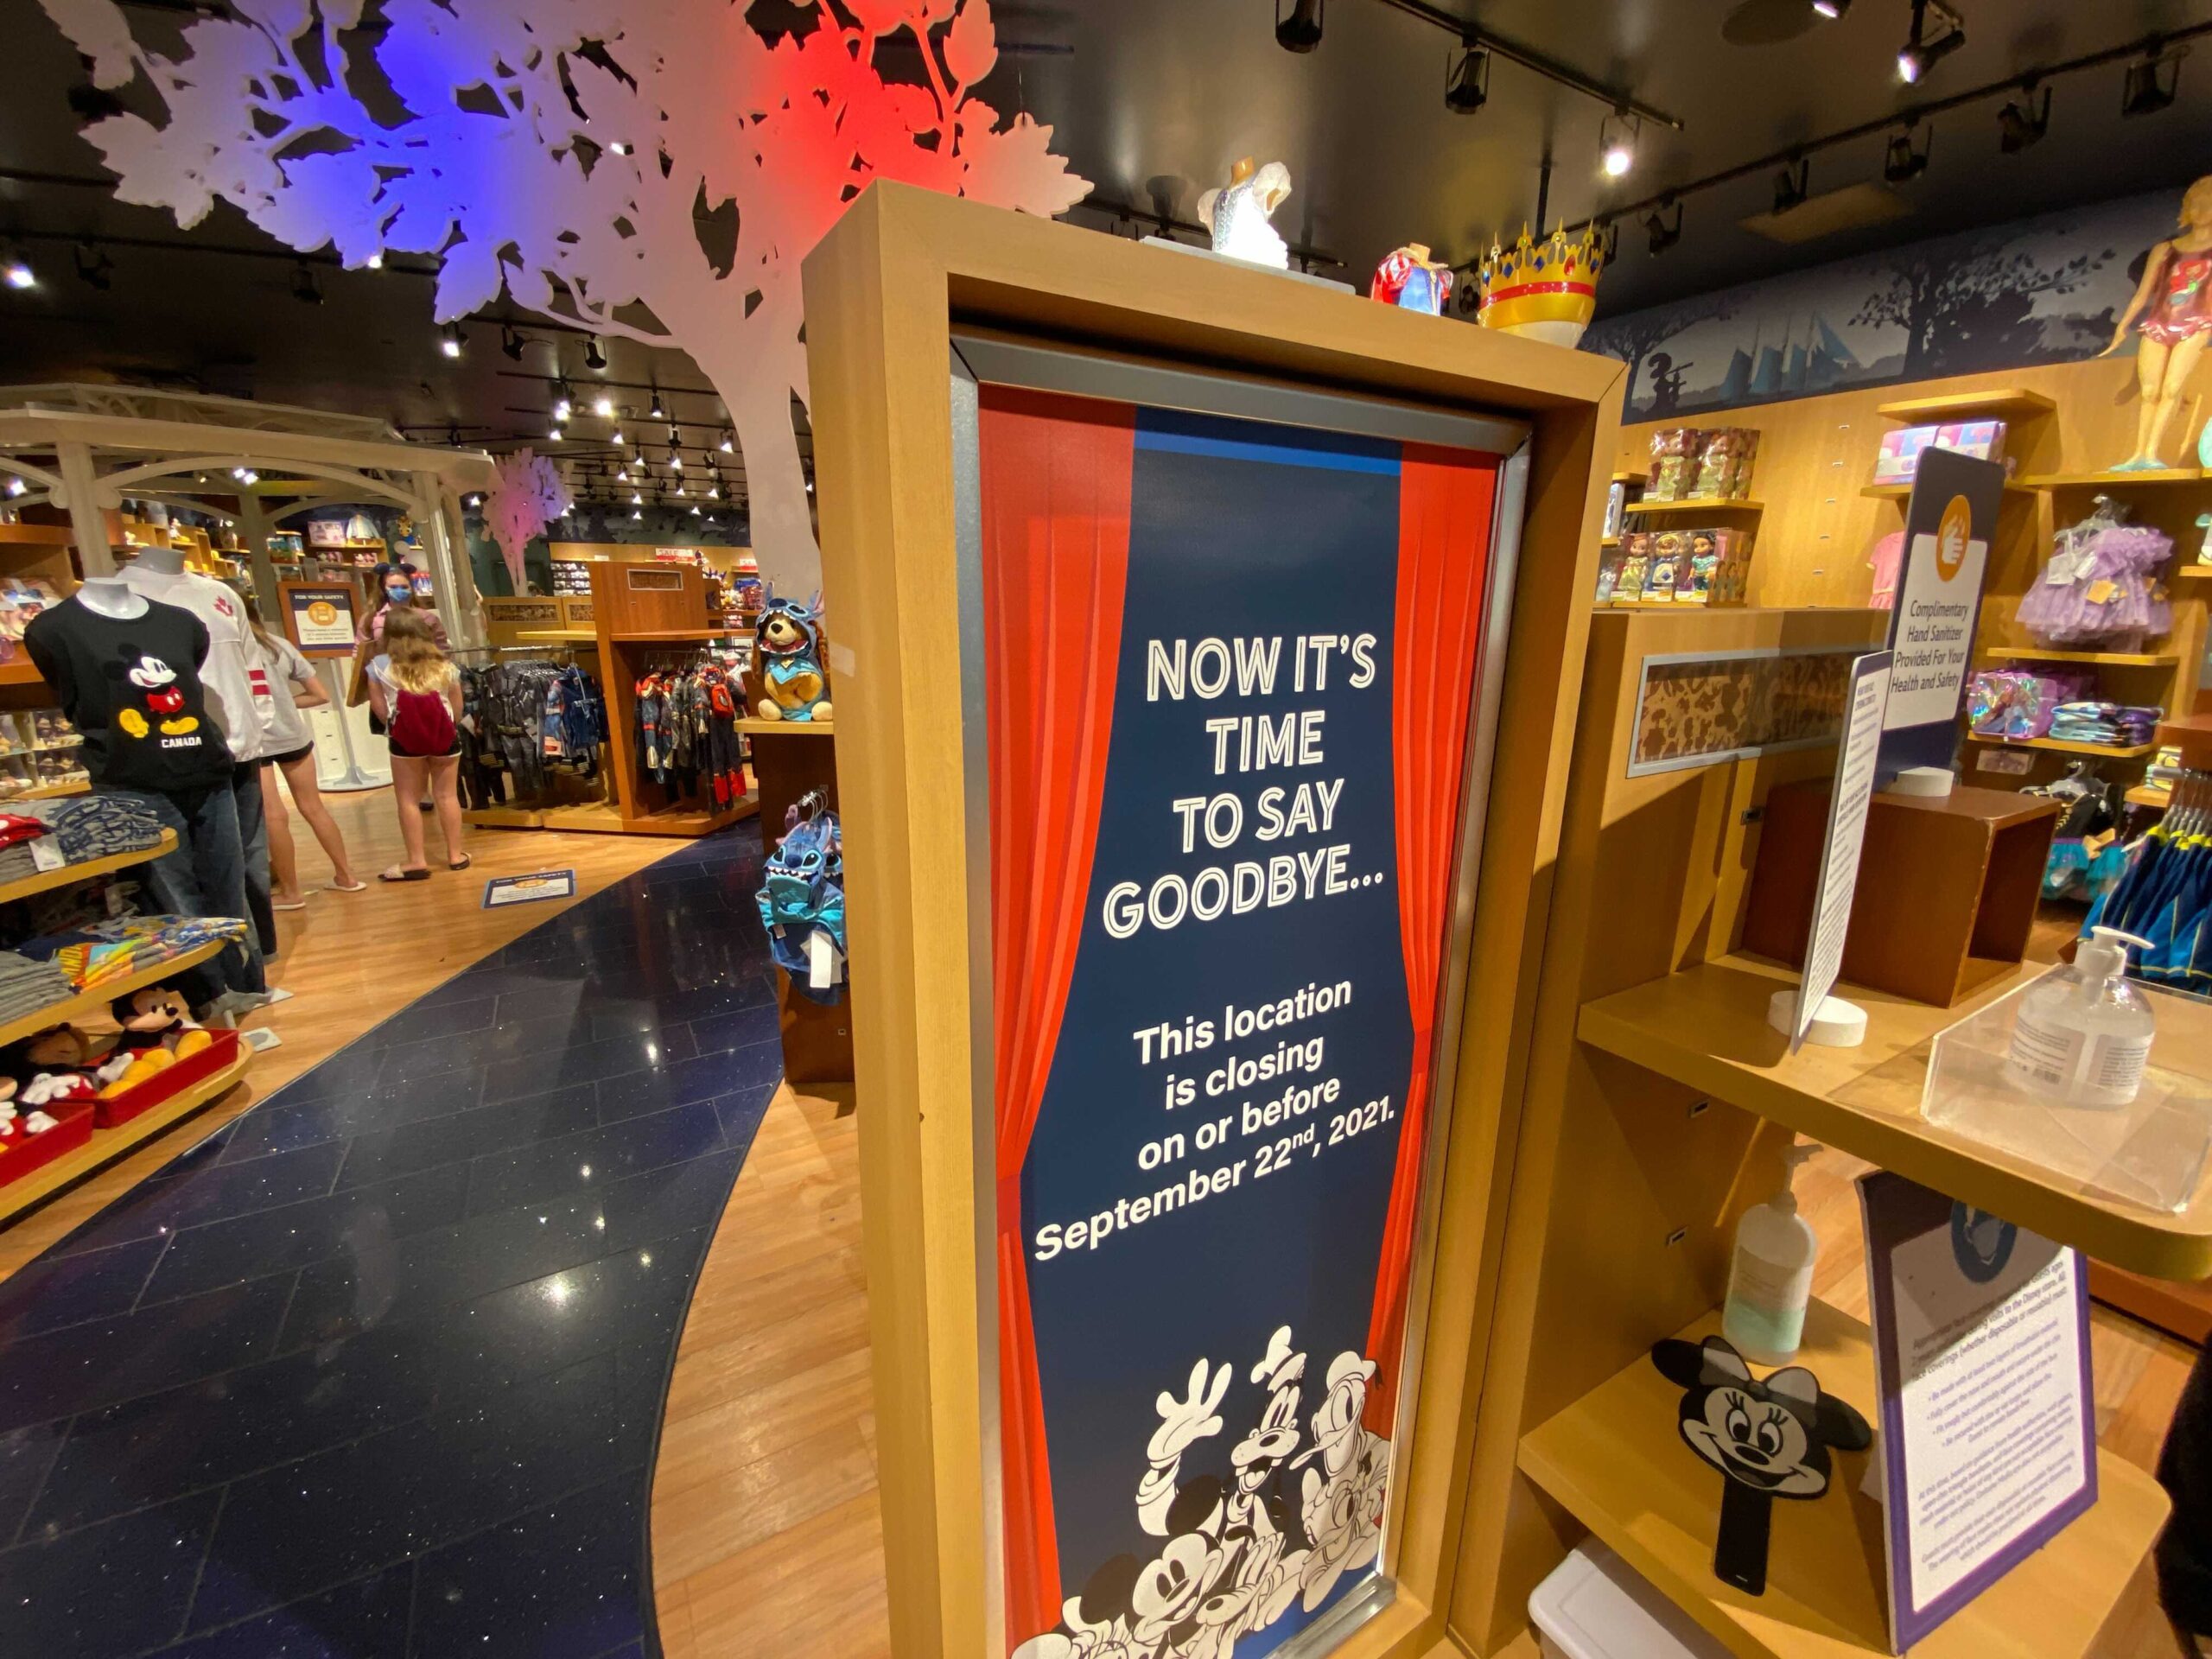 Which Disney stores are closing?